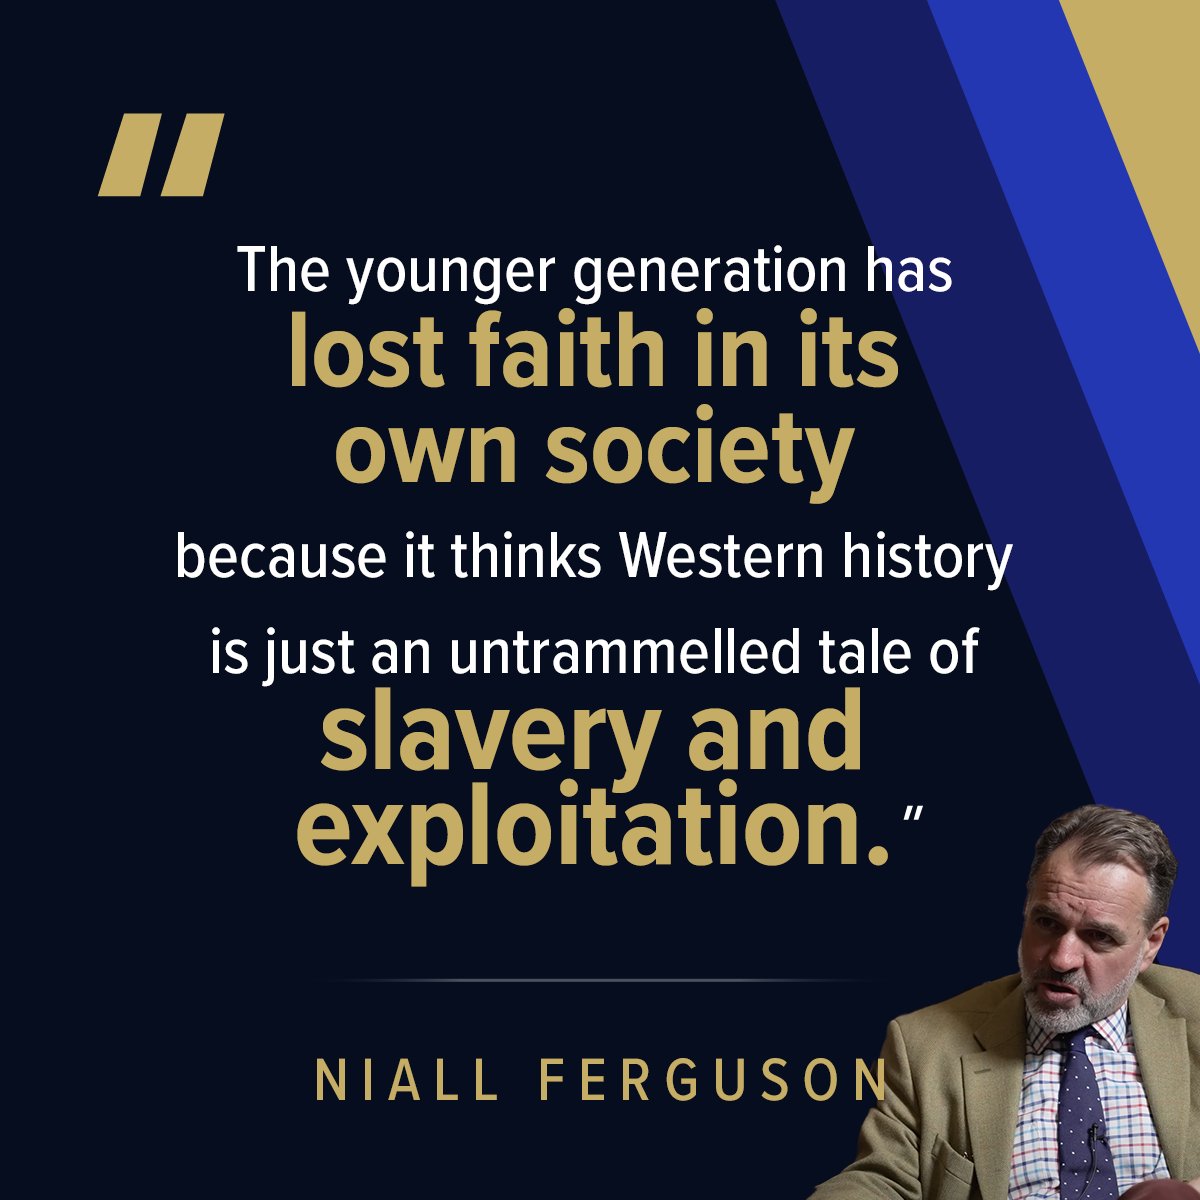 'The younger generation has lost faith in its own society because it thinks Western history is just an untrammelled tale of slavery and exploitation.' - Niall Ferguson. You can watch the full conversation with @nfergus here: youtube.com/watch?v=_DfTlP…